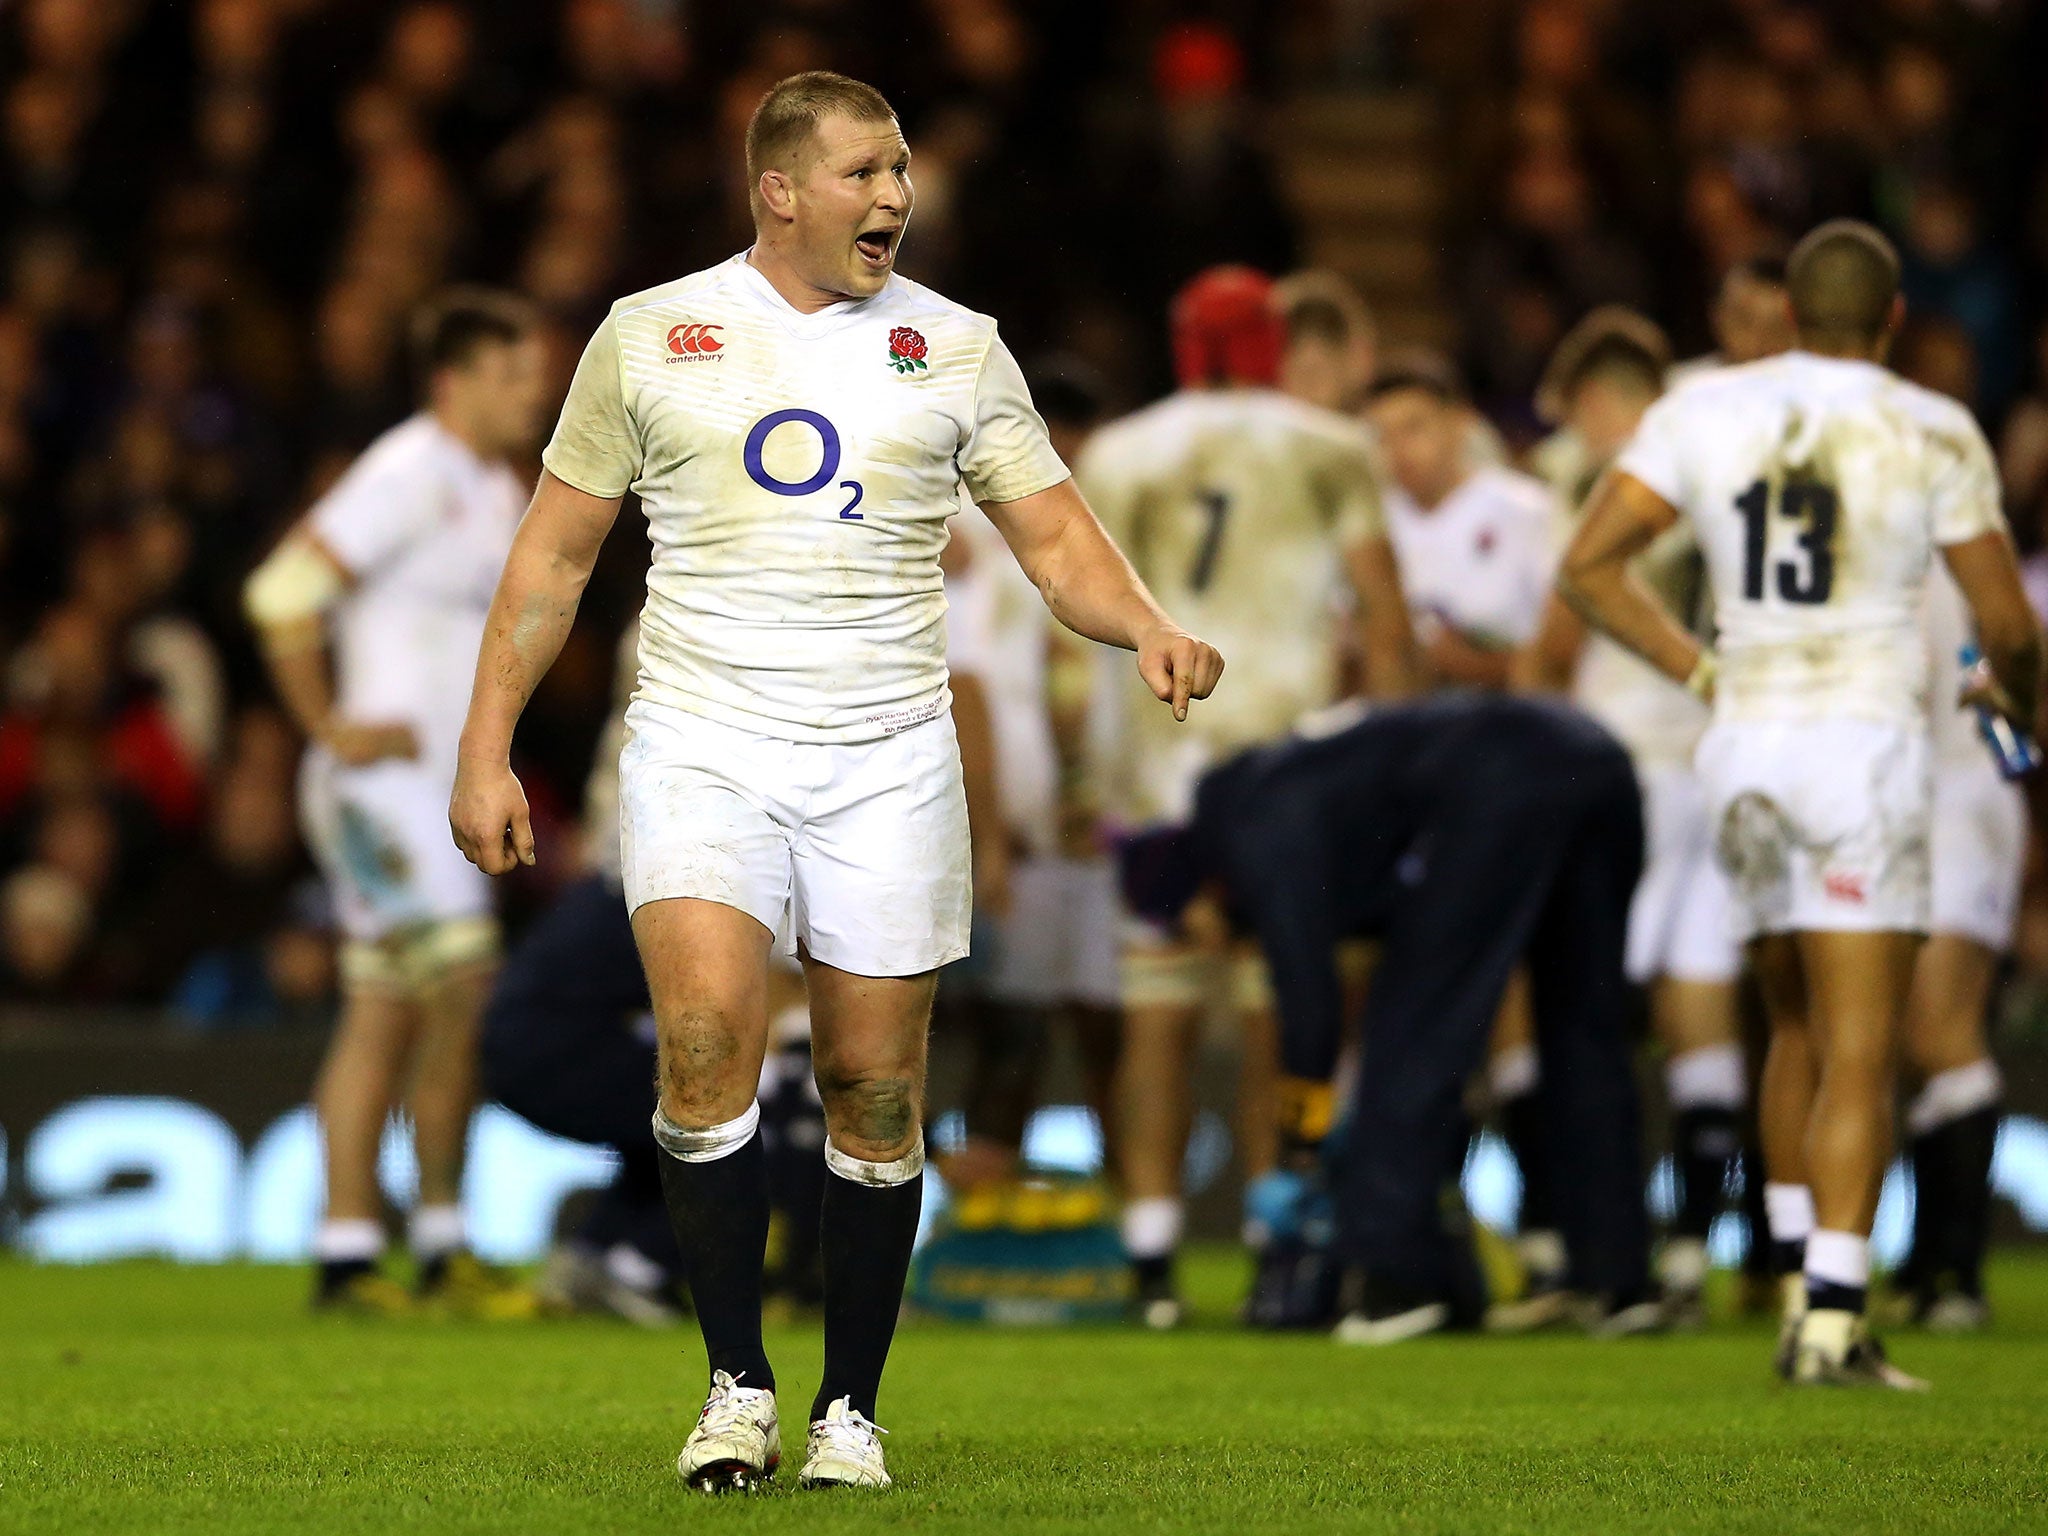 Dylan Hartley leaves the field during England's 15-9 win over Scotland